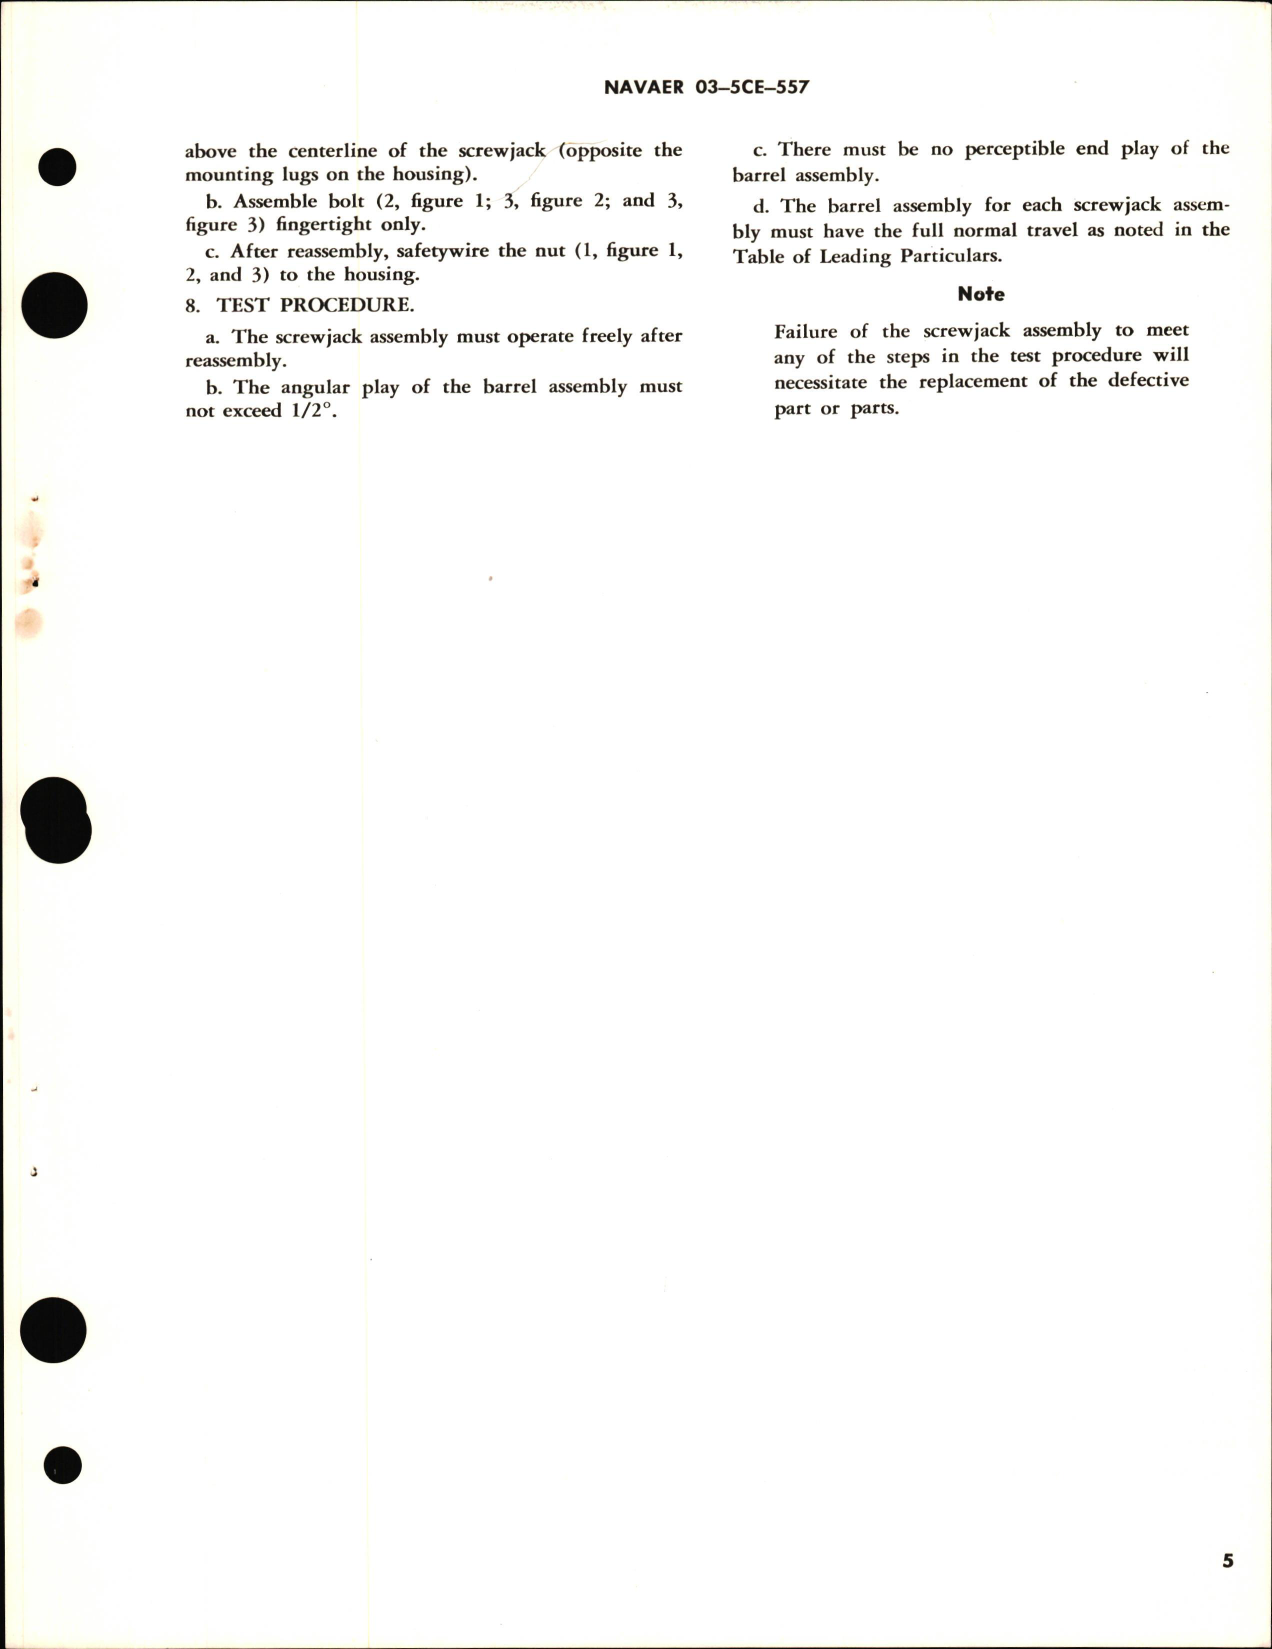 Sample page 5 from AirCorps Library document: Overhaul Instructions with Parts Breakdown for Trim Tab Screwjack Assemblies